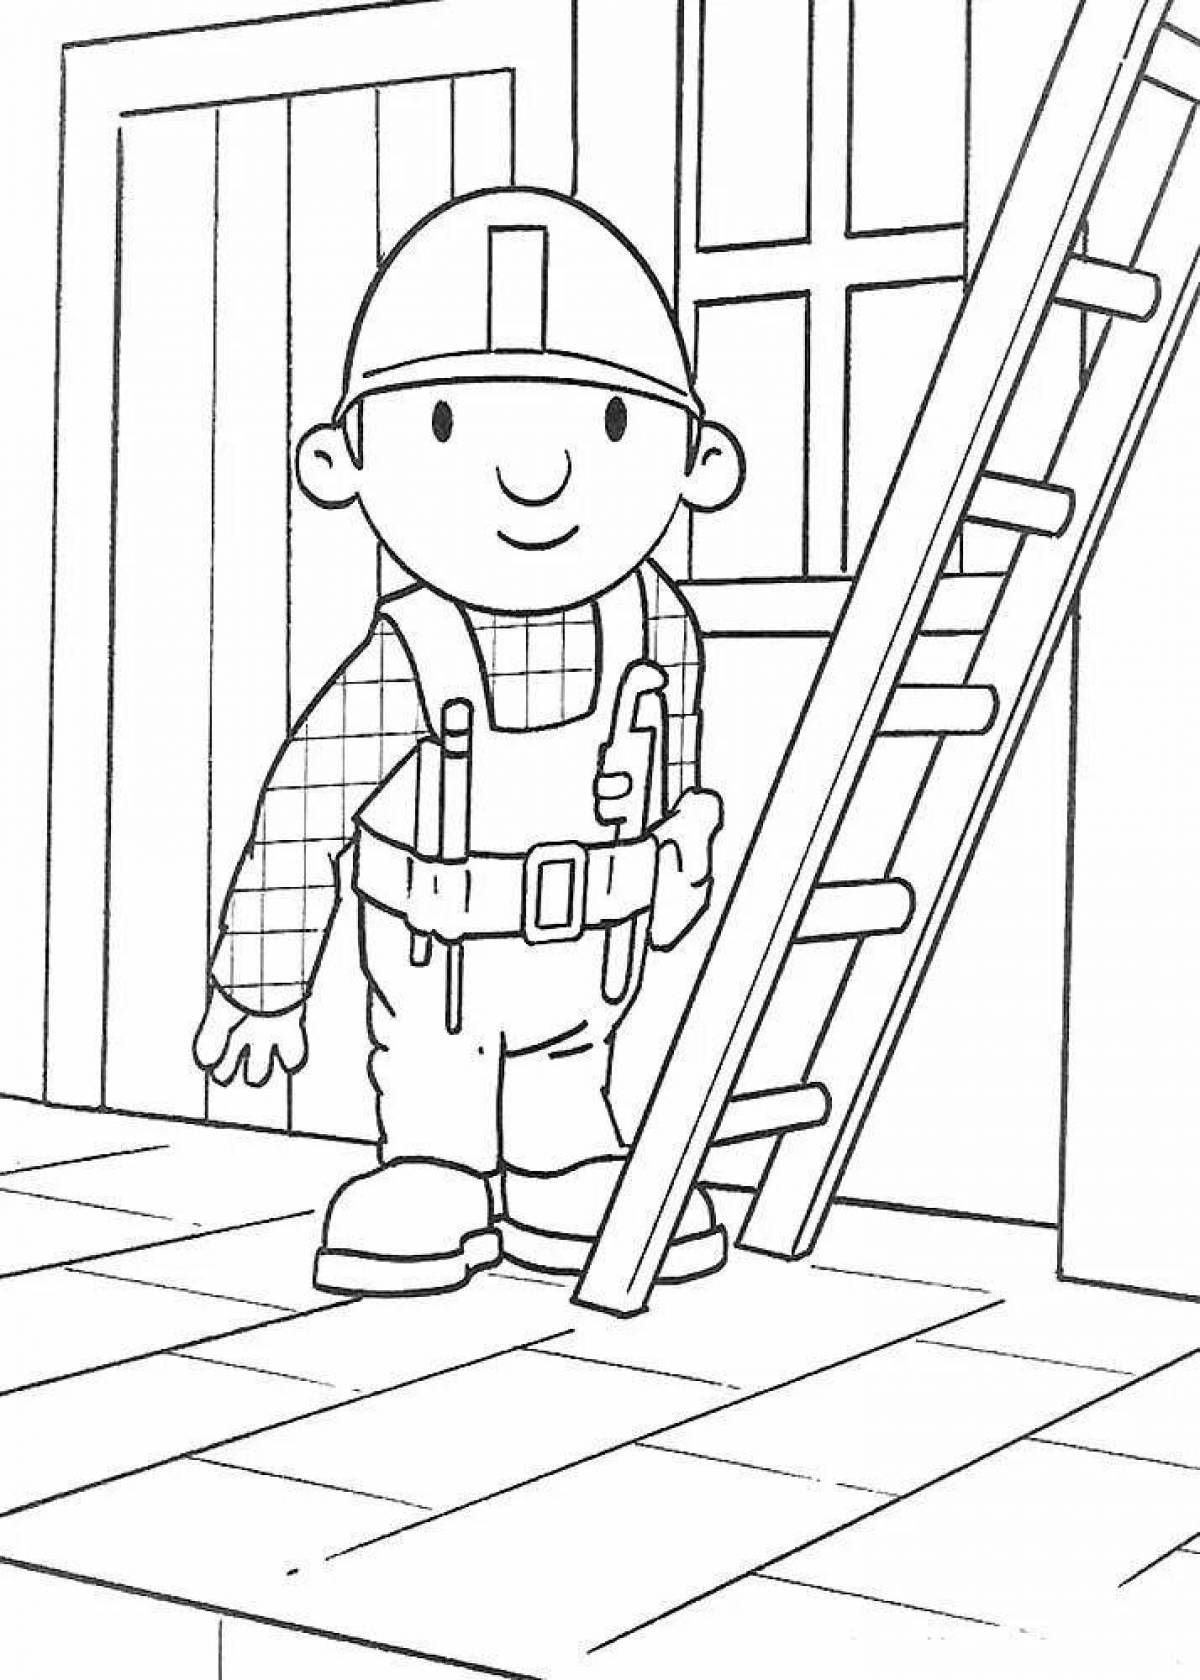 Occupational safety through the eyes of children #13